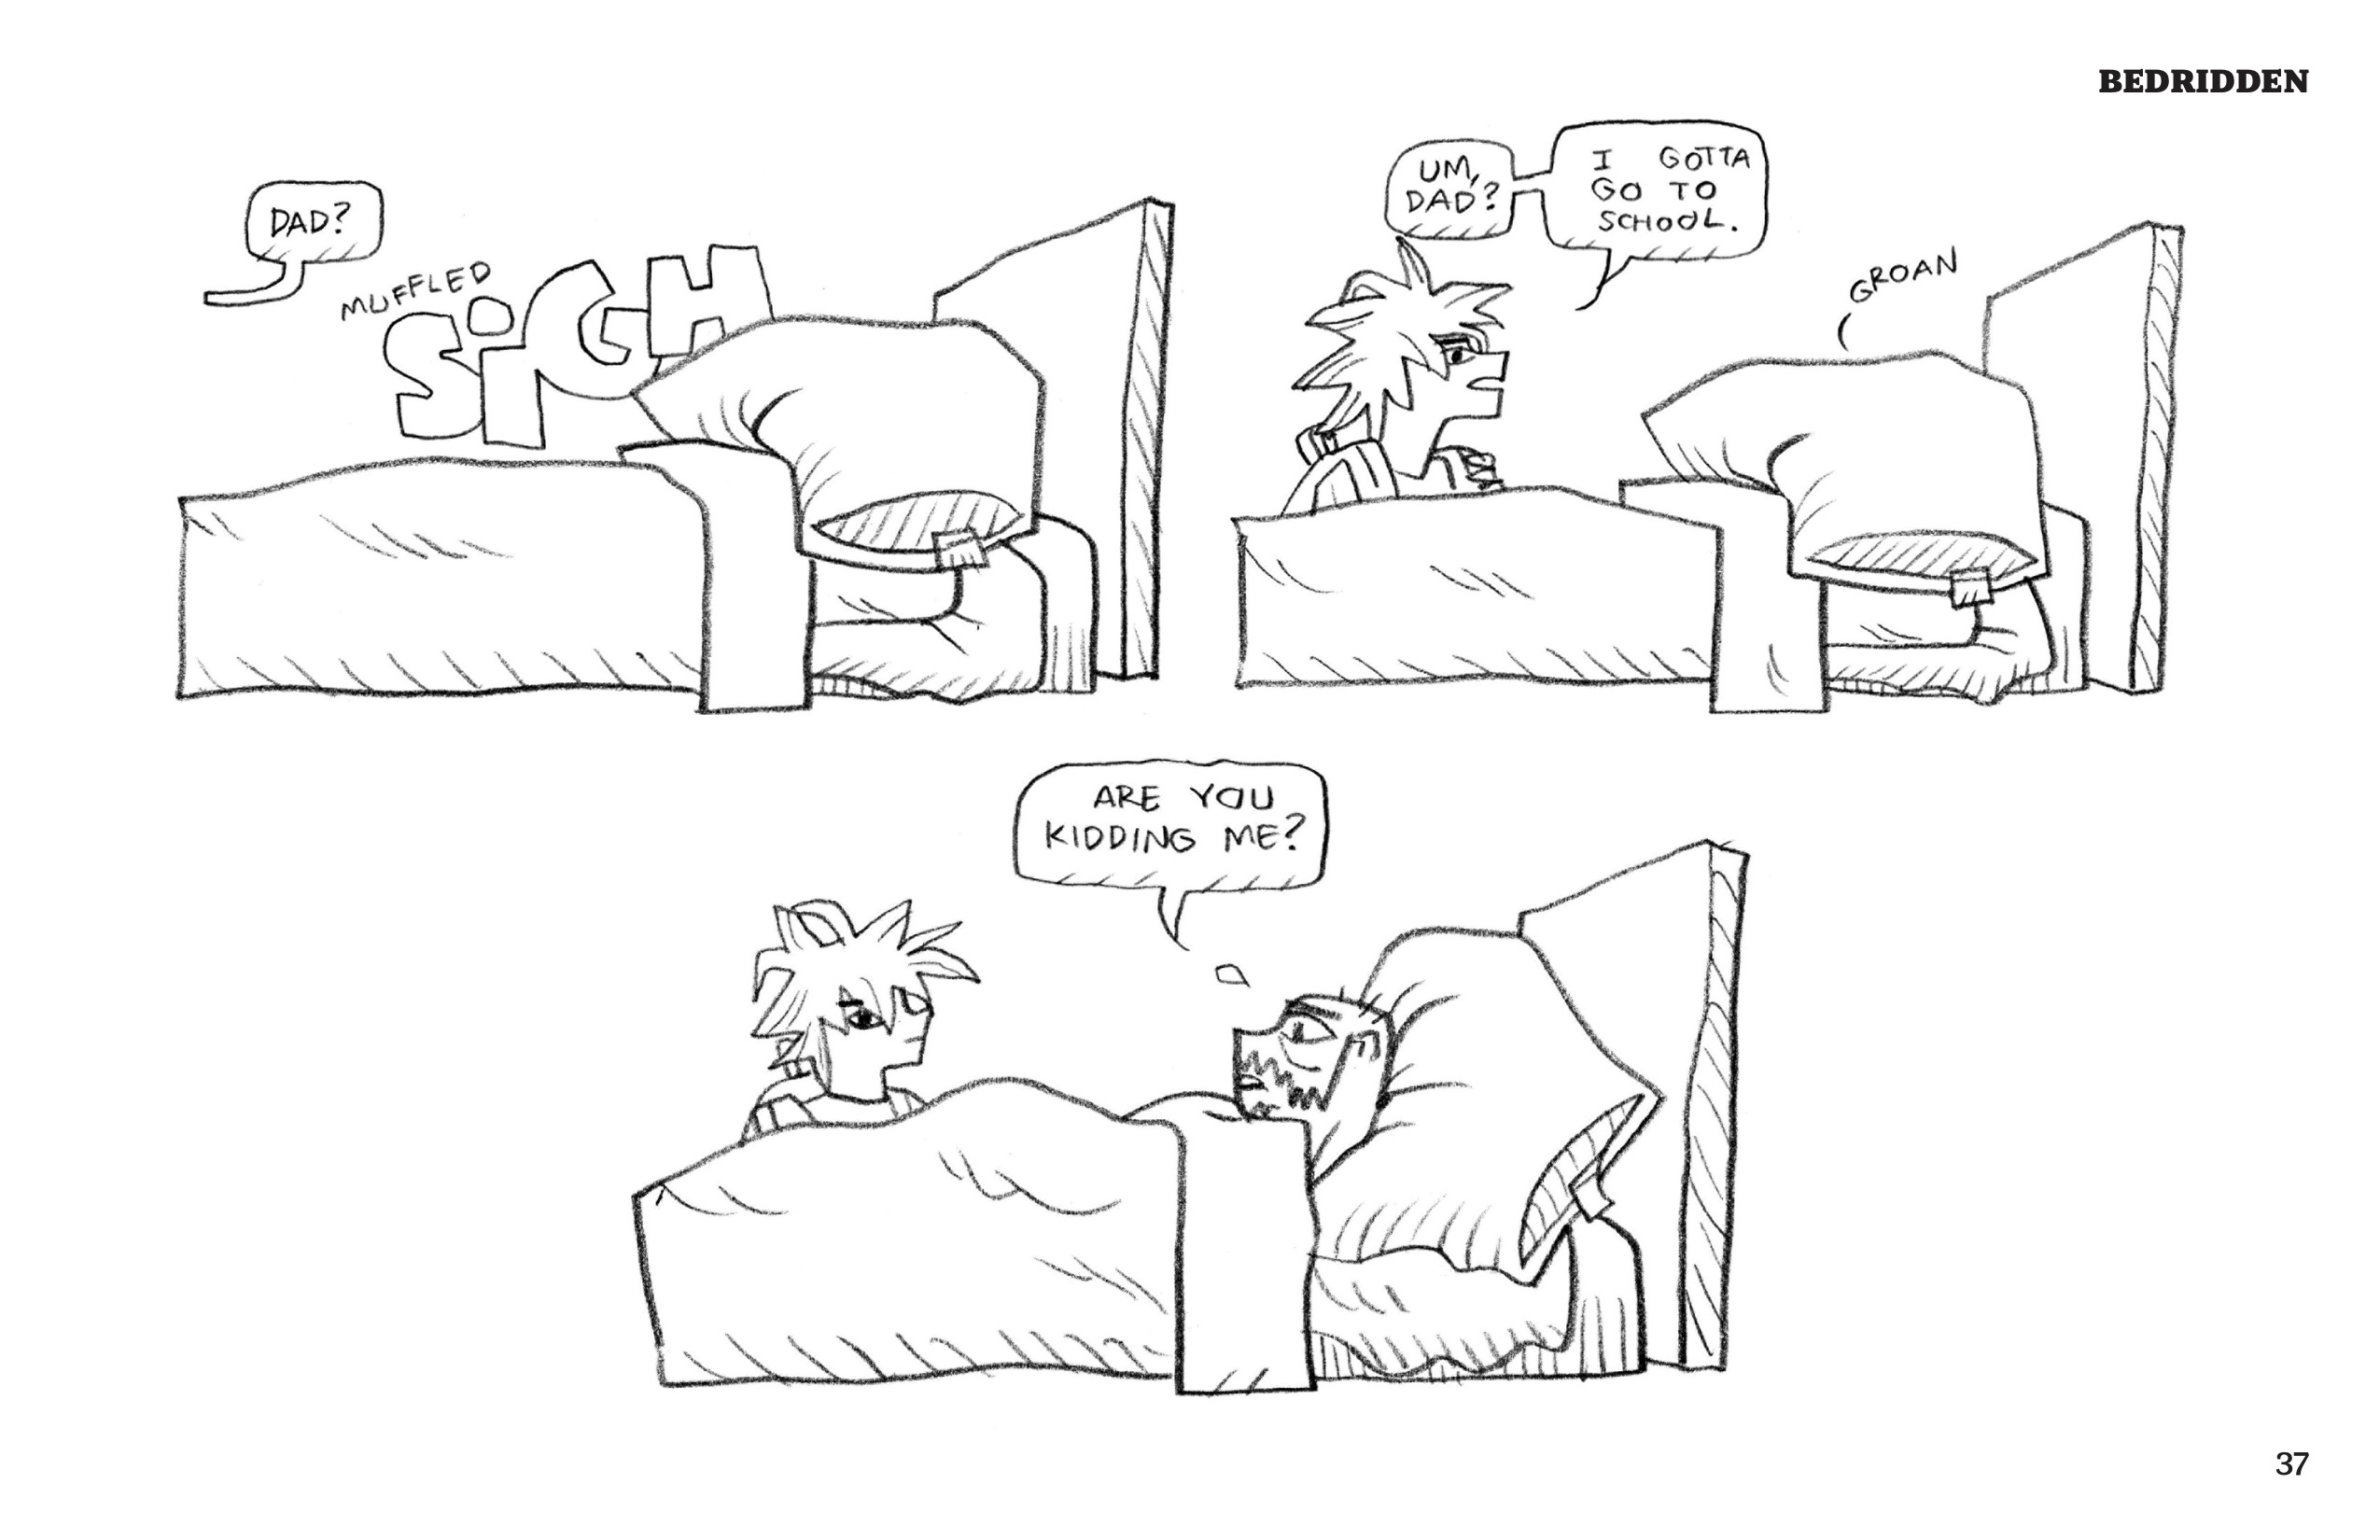 1. Derek is lying in bed, completely covered by his comforter and the pillow on top of his head. He huffs a â€œmuffled SIGHâ€ (drawn in big block letters). From off panel, one of his kids calls, â€œDad?â€ 2. Derek has not moved, still covered by the blanket and pillow. His youngest kid stands by the side of his bed now; they are wearing a backpack. They say, â€œUm, dad? I gotta go to school.â€ Derek groans in response. 3. Derekâ€™s head pops up, now resting on his pillow (instead of under it). He looks up at his kid, frowning, and says, â€œAre you kidding me?â€ His kid looks blankly at the reader with a side-eye.